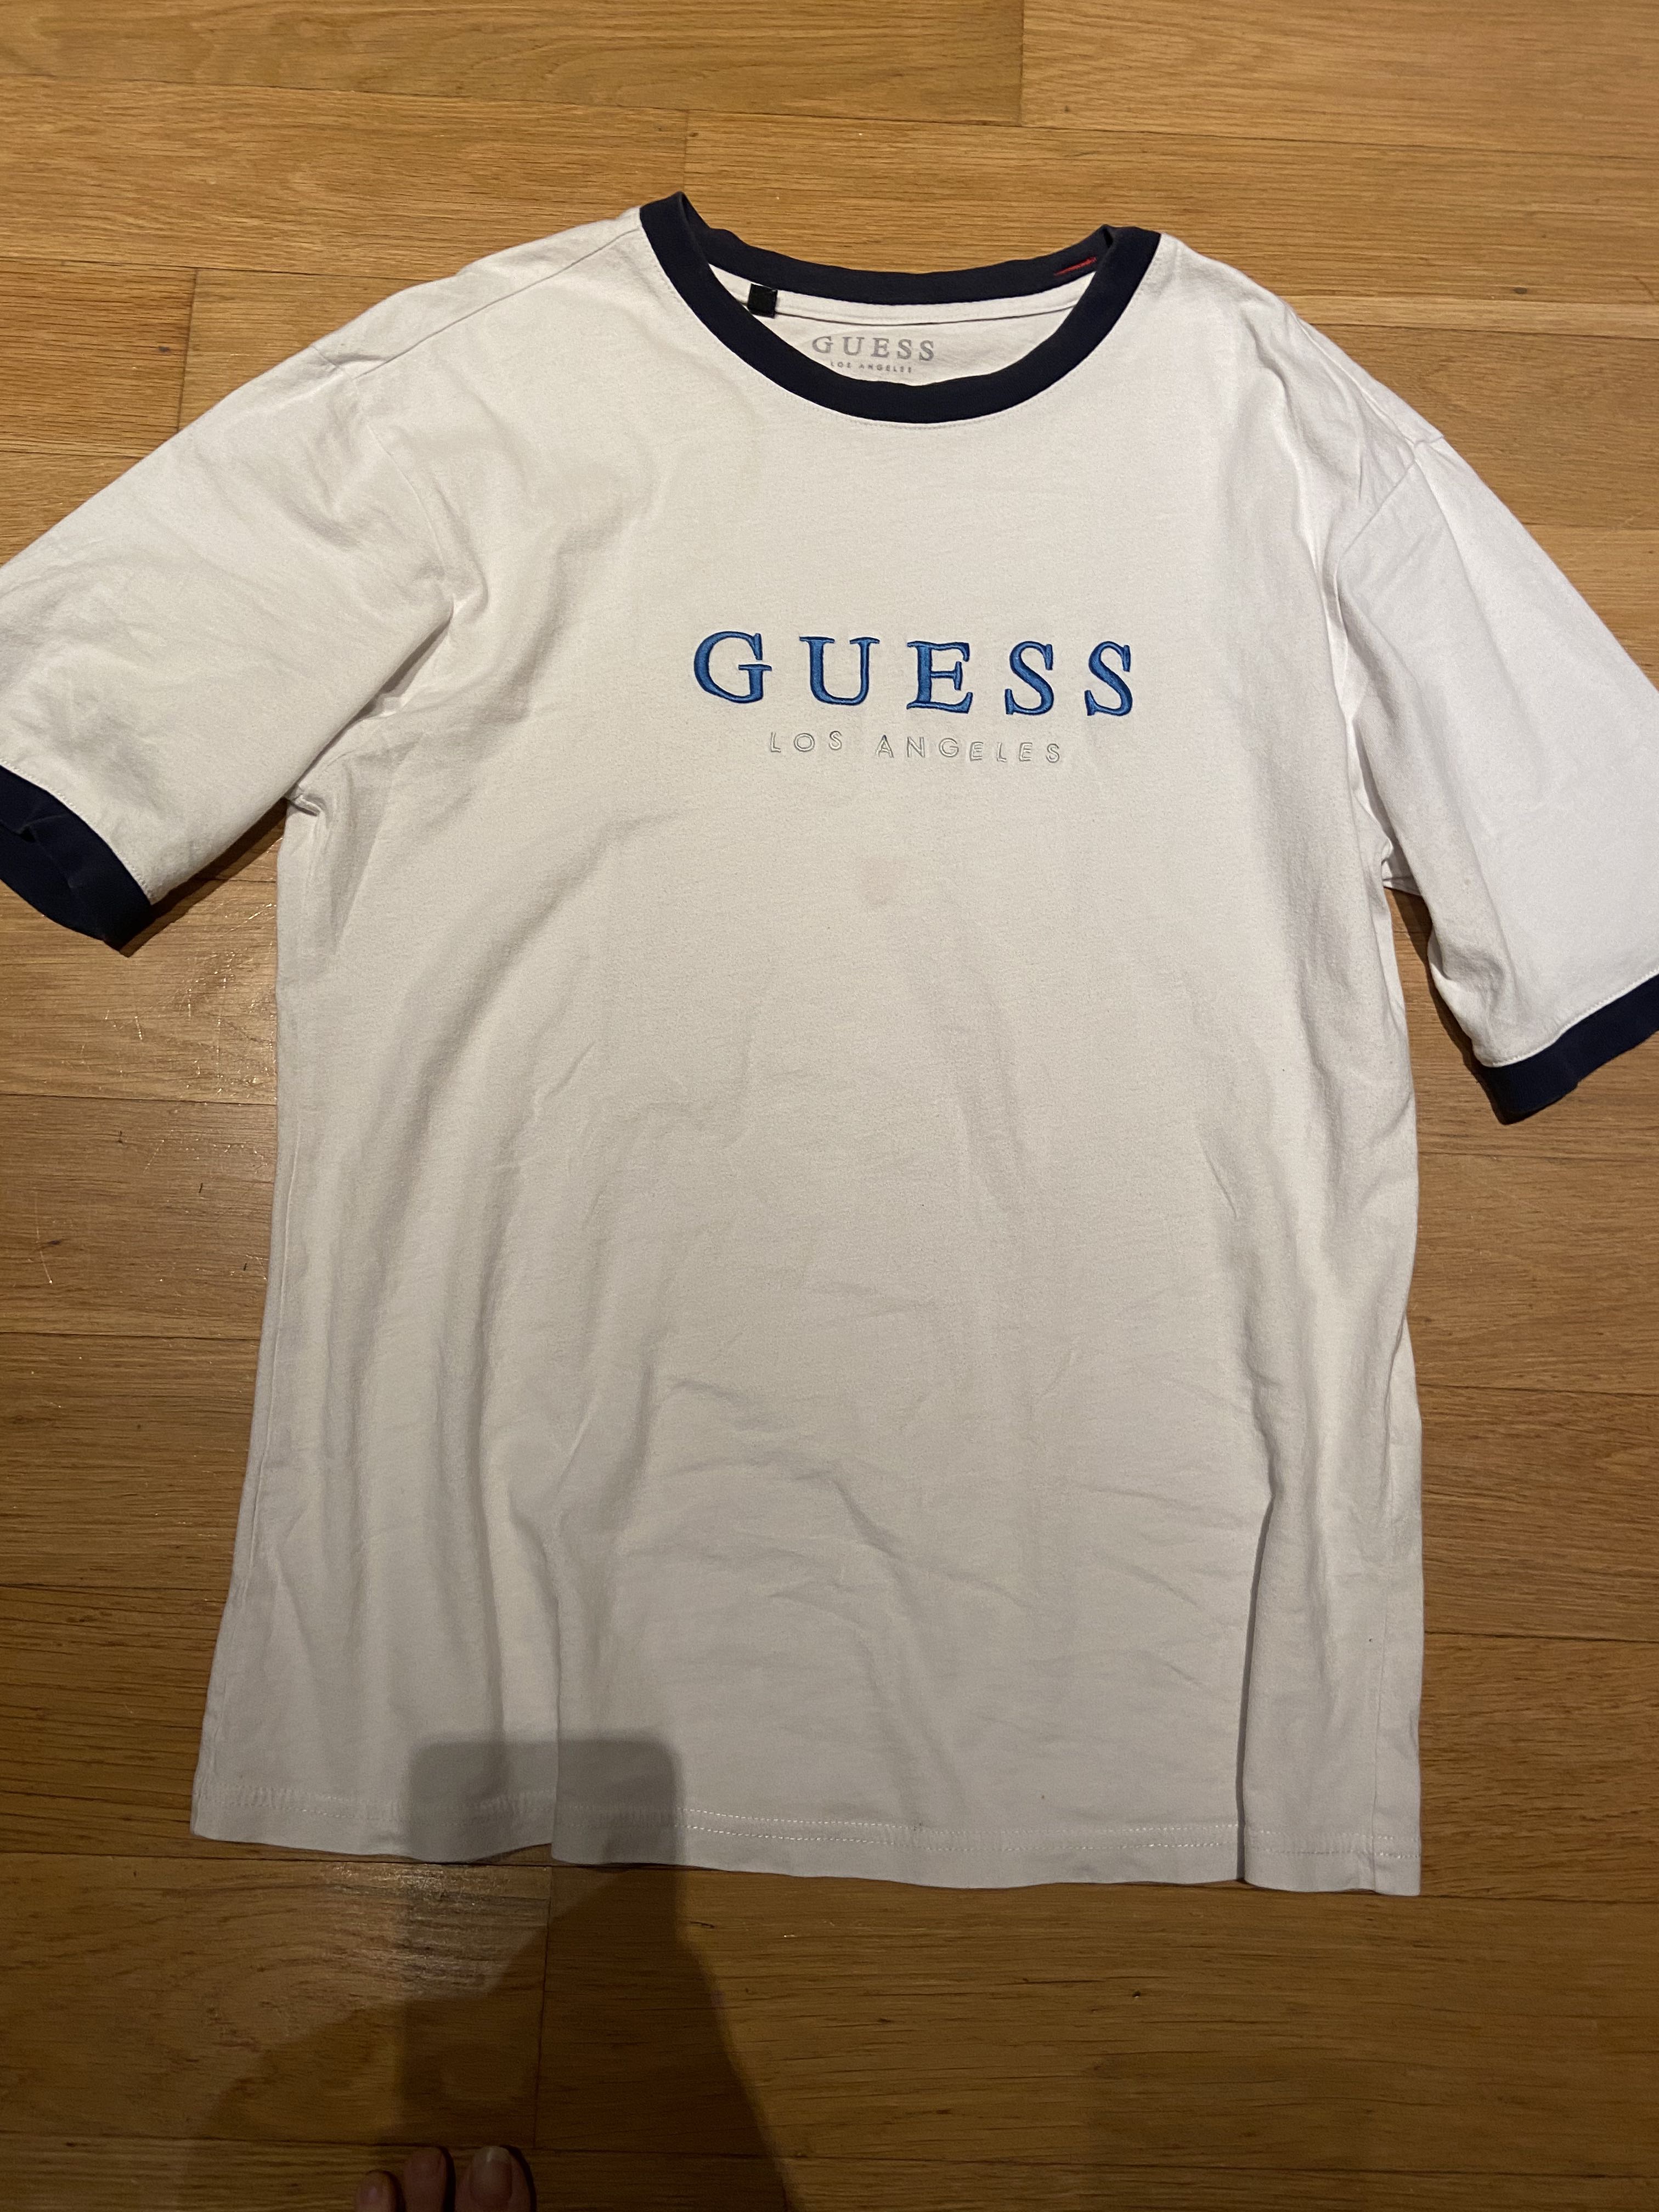 Guess Los Angeles Shirt, Women's Fashion, Tops, Shirts on Carousell